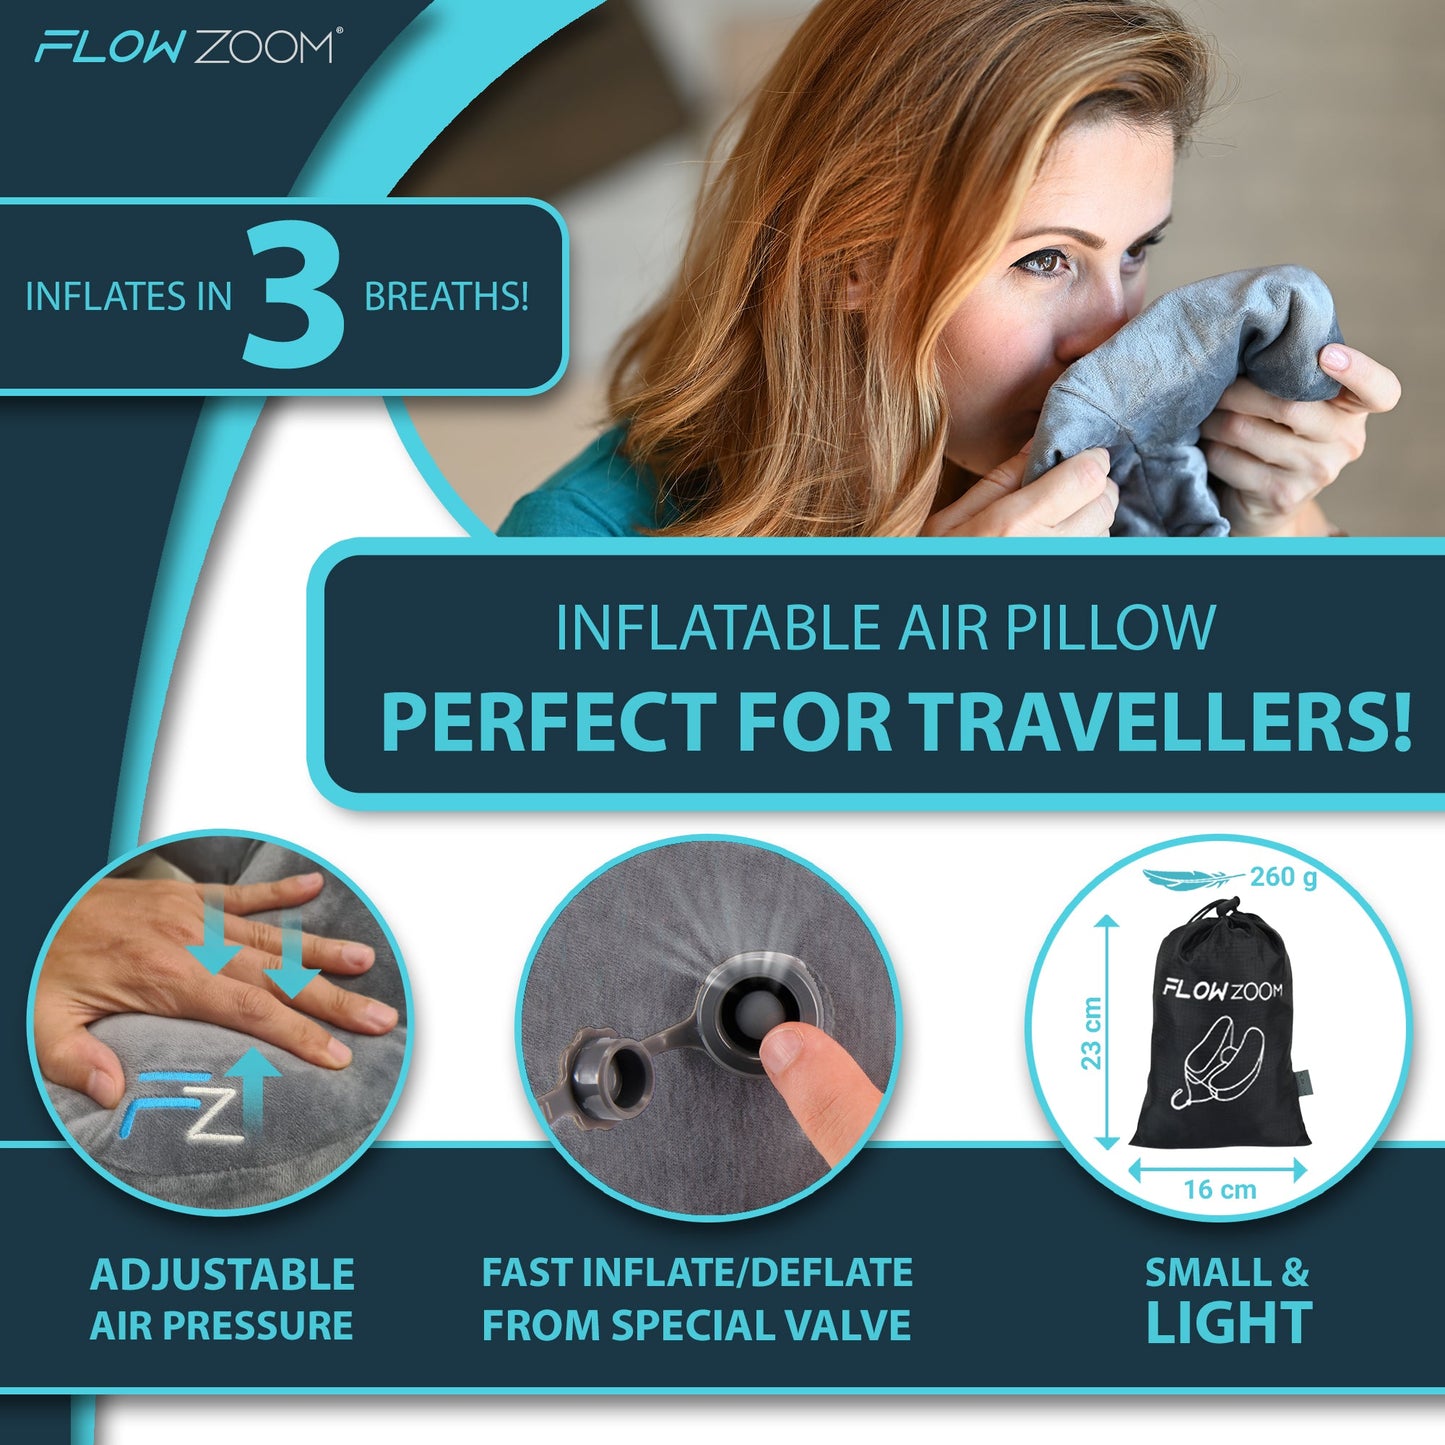 Inflatable air pillow perfect for travellers